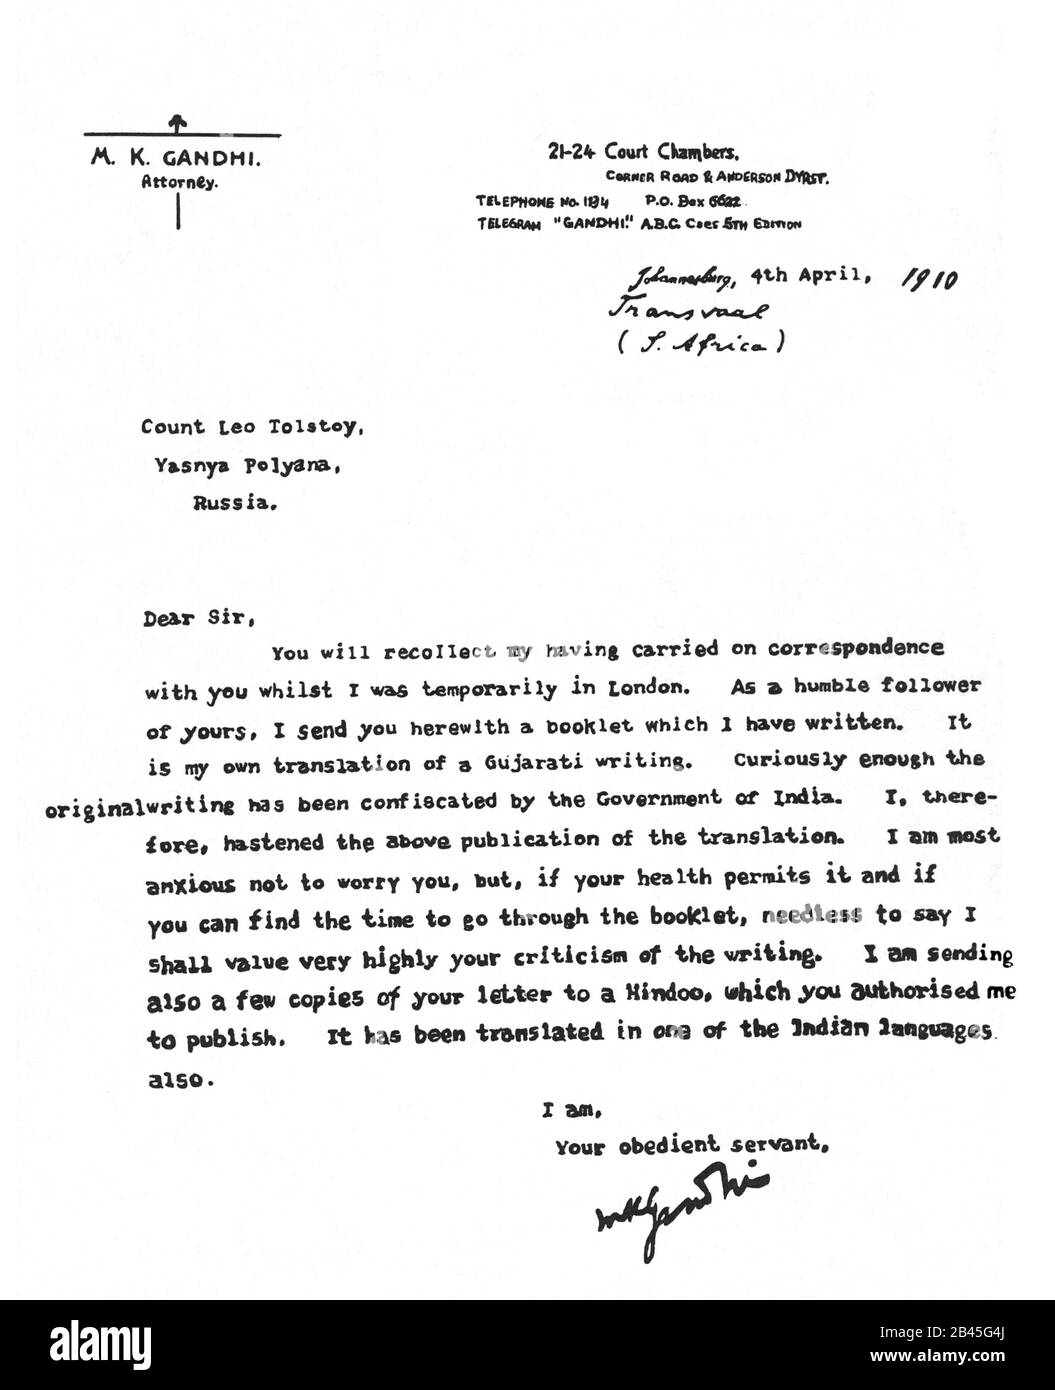 Mahatma Gandhi letter on M. K. Gandhi, Attorney, Bombay, India,  letter head to Russian writer Count Leo Tolstoy, from Tolstoy Farm, Transvaal, Johannesburg, South Africa, 4 April 1910, old vintage 1900s picture Stock Photo